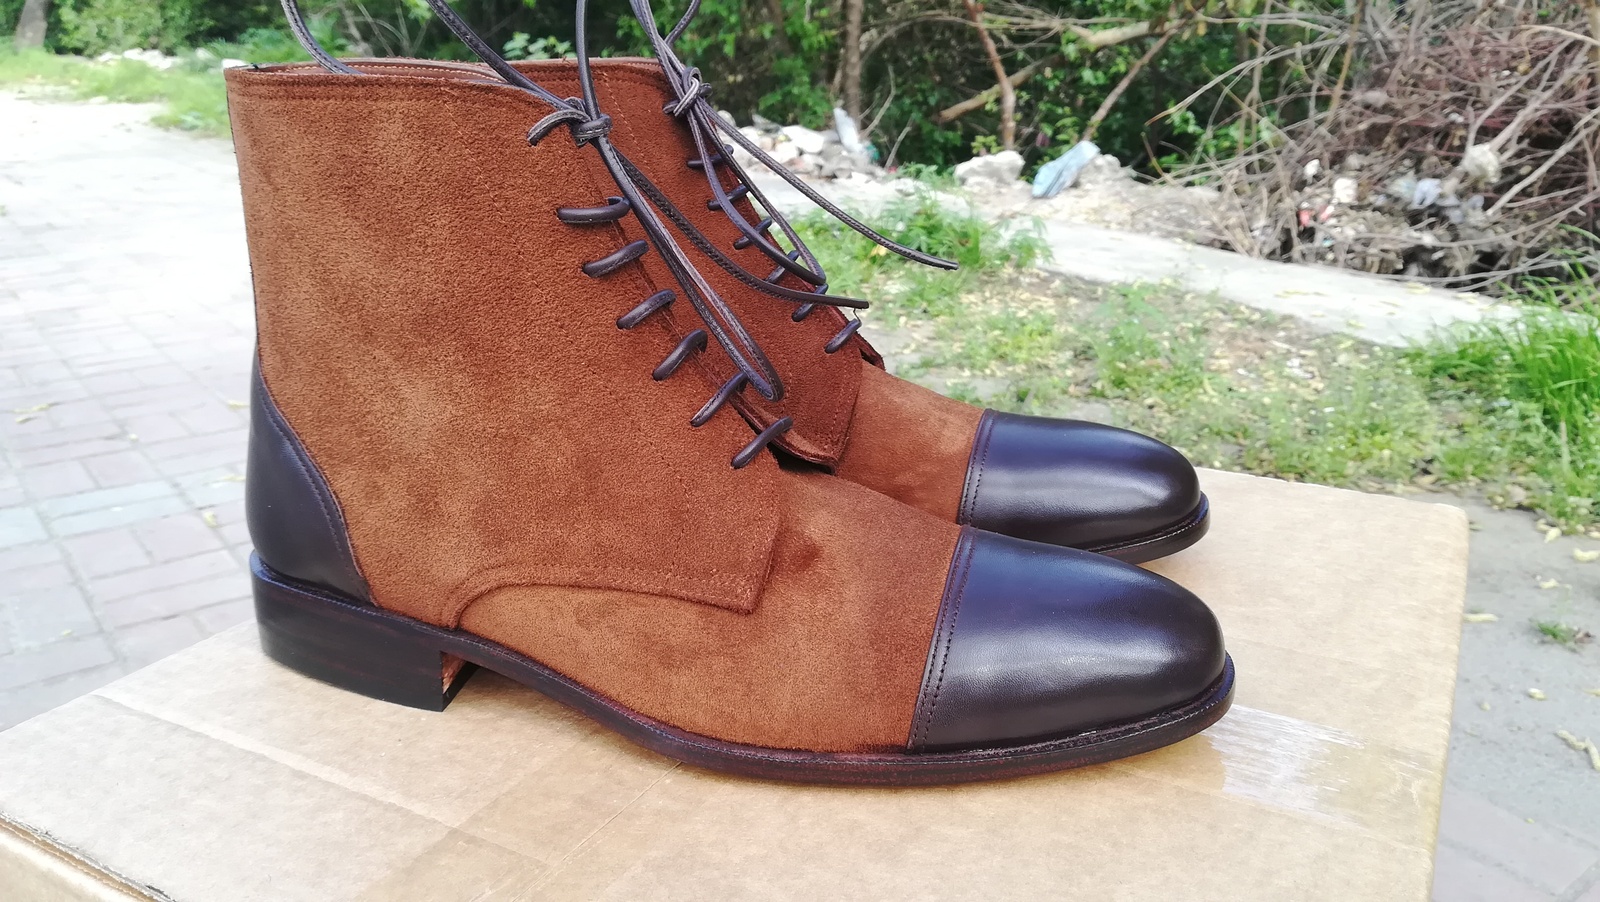 Handmade Mens Brown Leather Suede Cap Toe Lace Up Boots, Men Ankle Fashion Boots